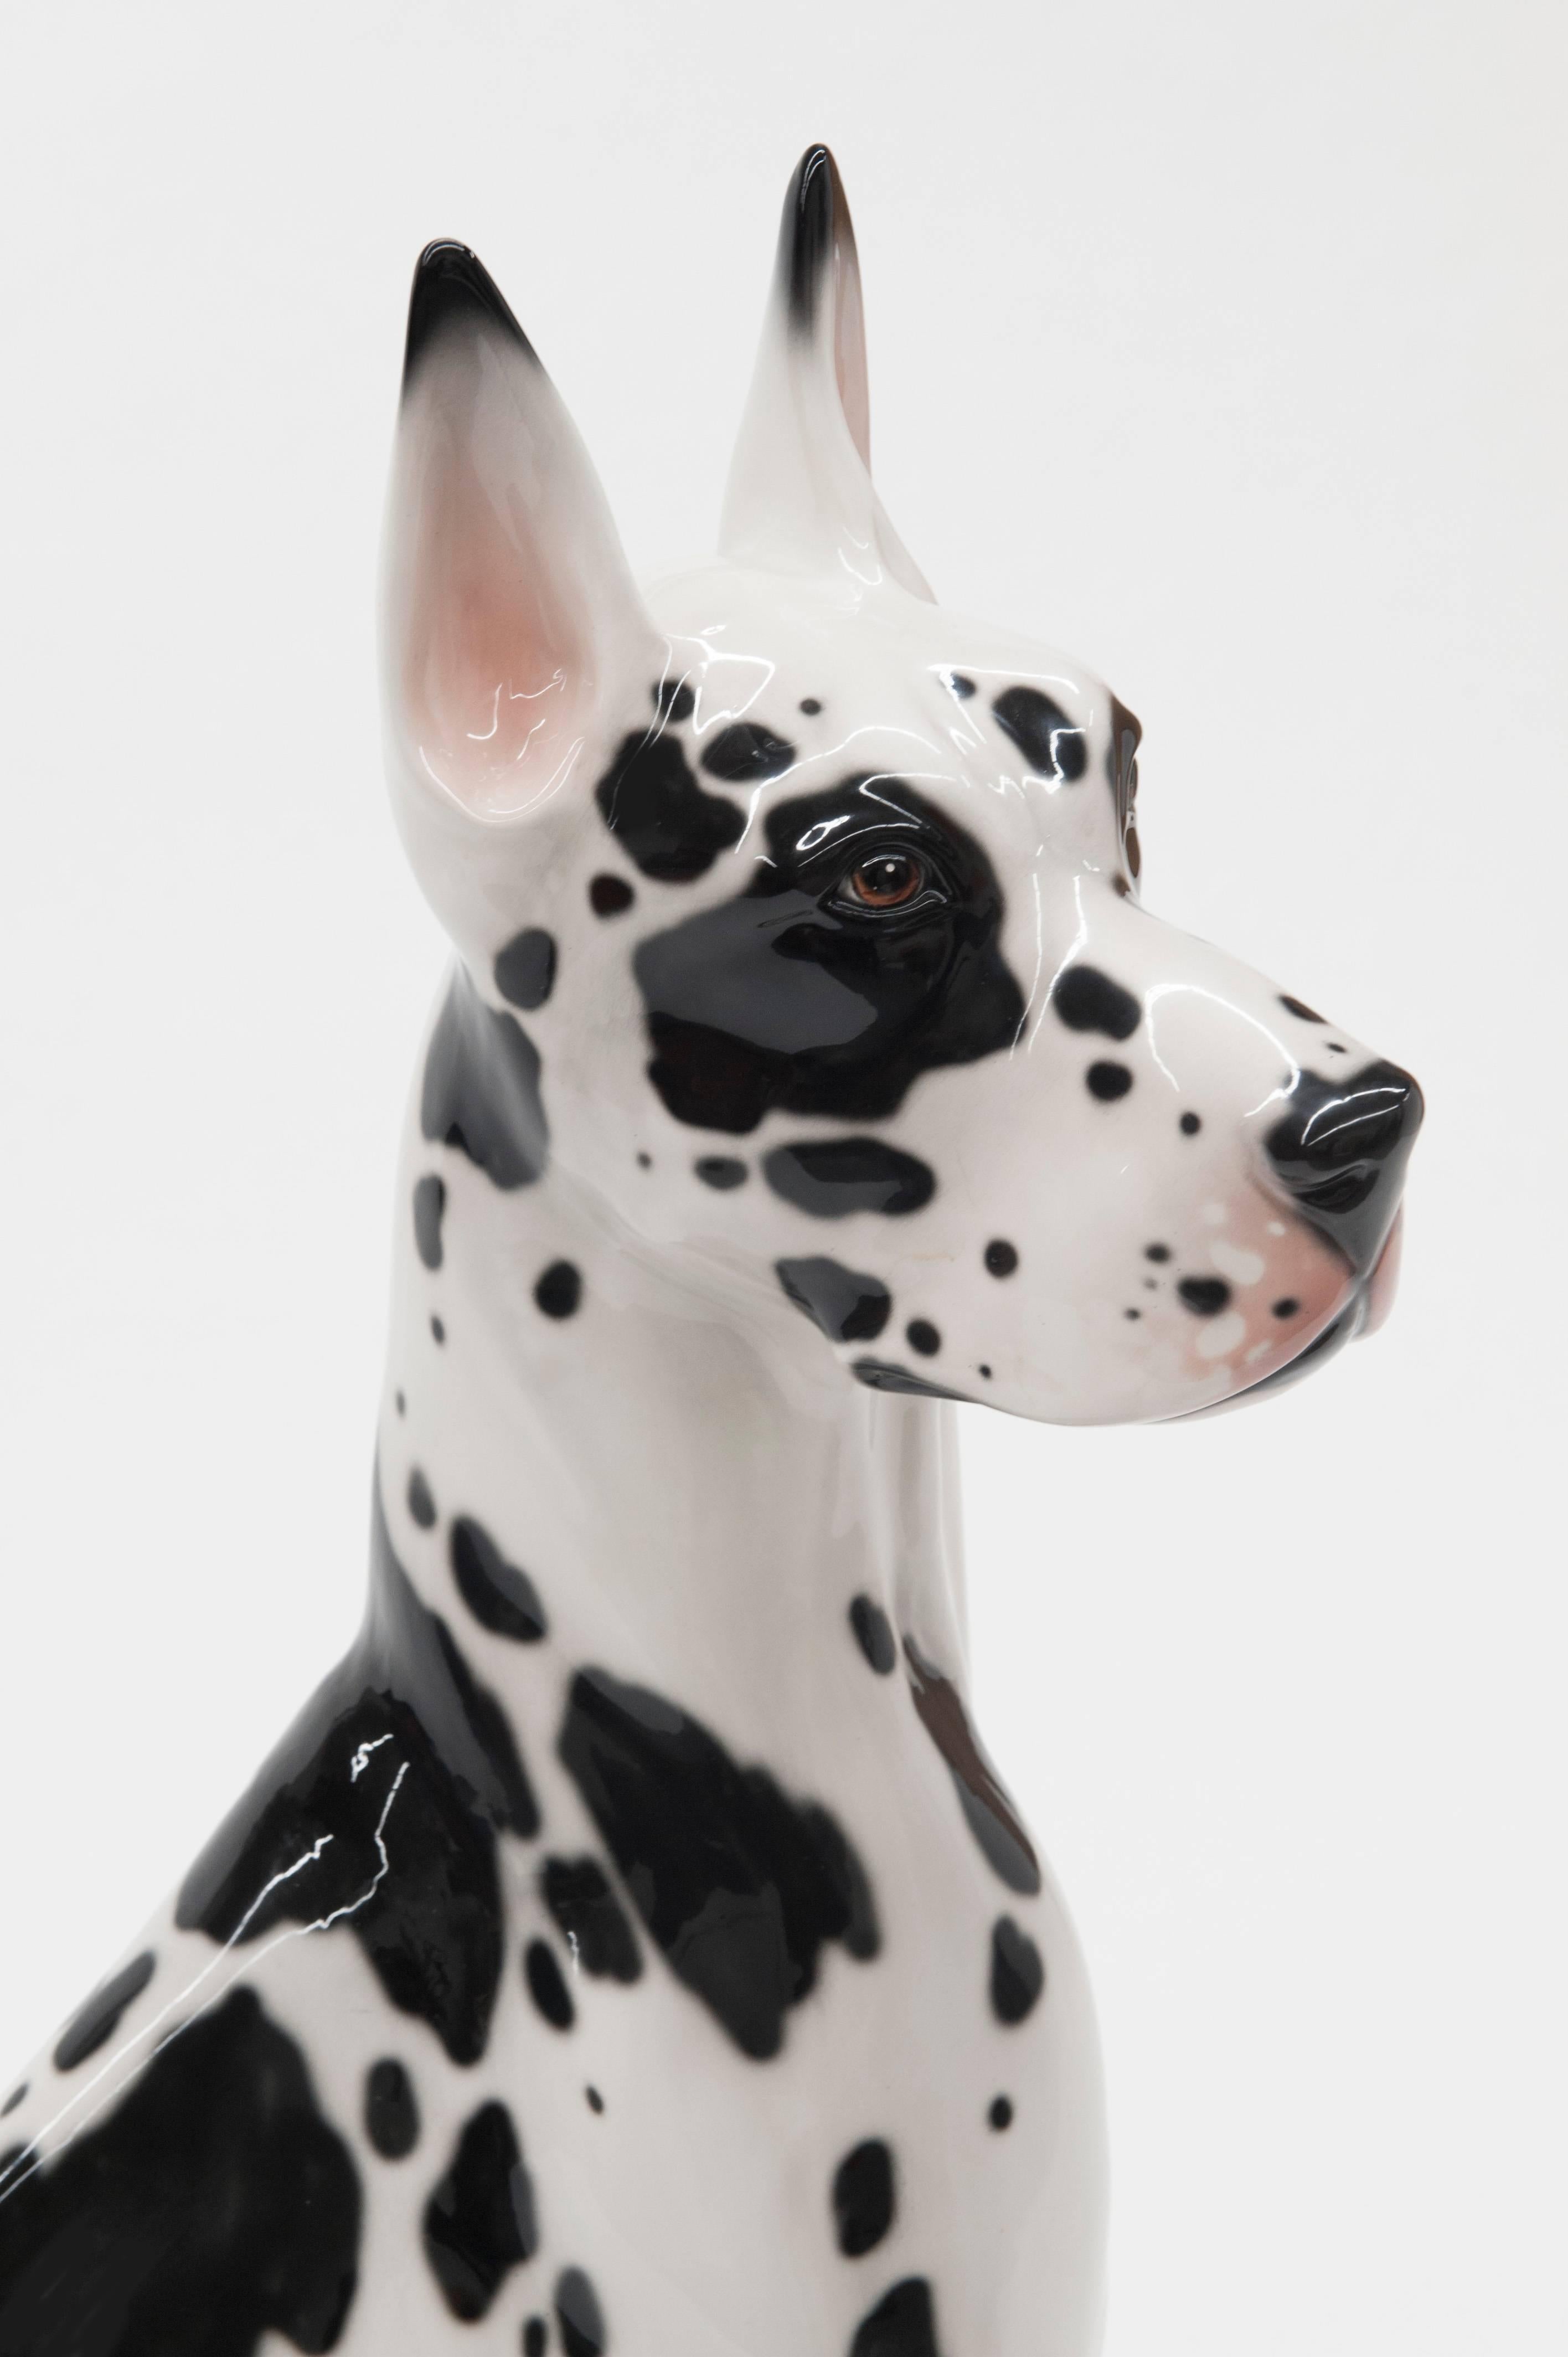 Large, life like porcelain Great Dane made in Italy. Hand-painted sculpture is in excellent condition with no issues to mention. Stamped "Made in Italy" to underside. Measures 37.5 inches high.
   